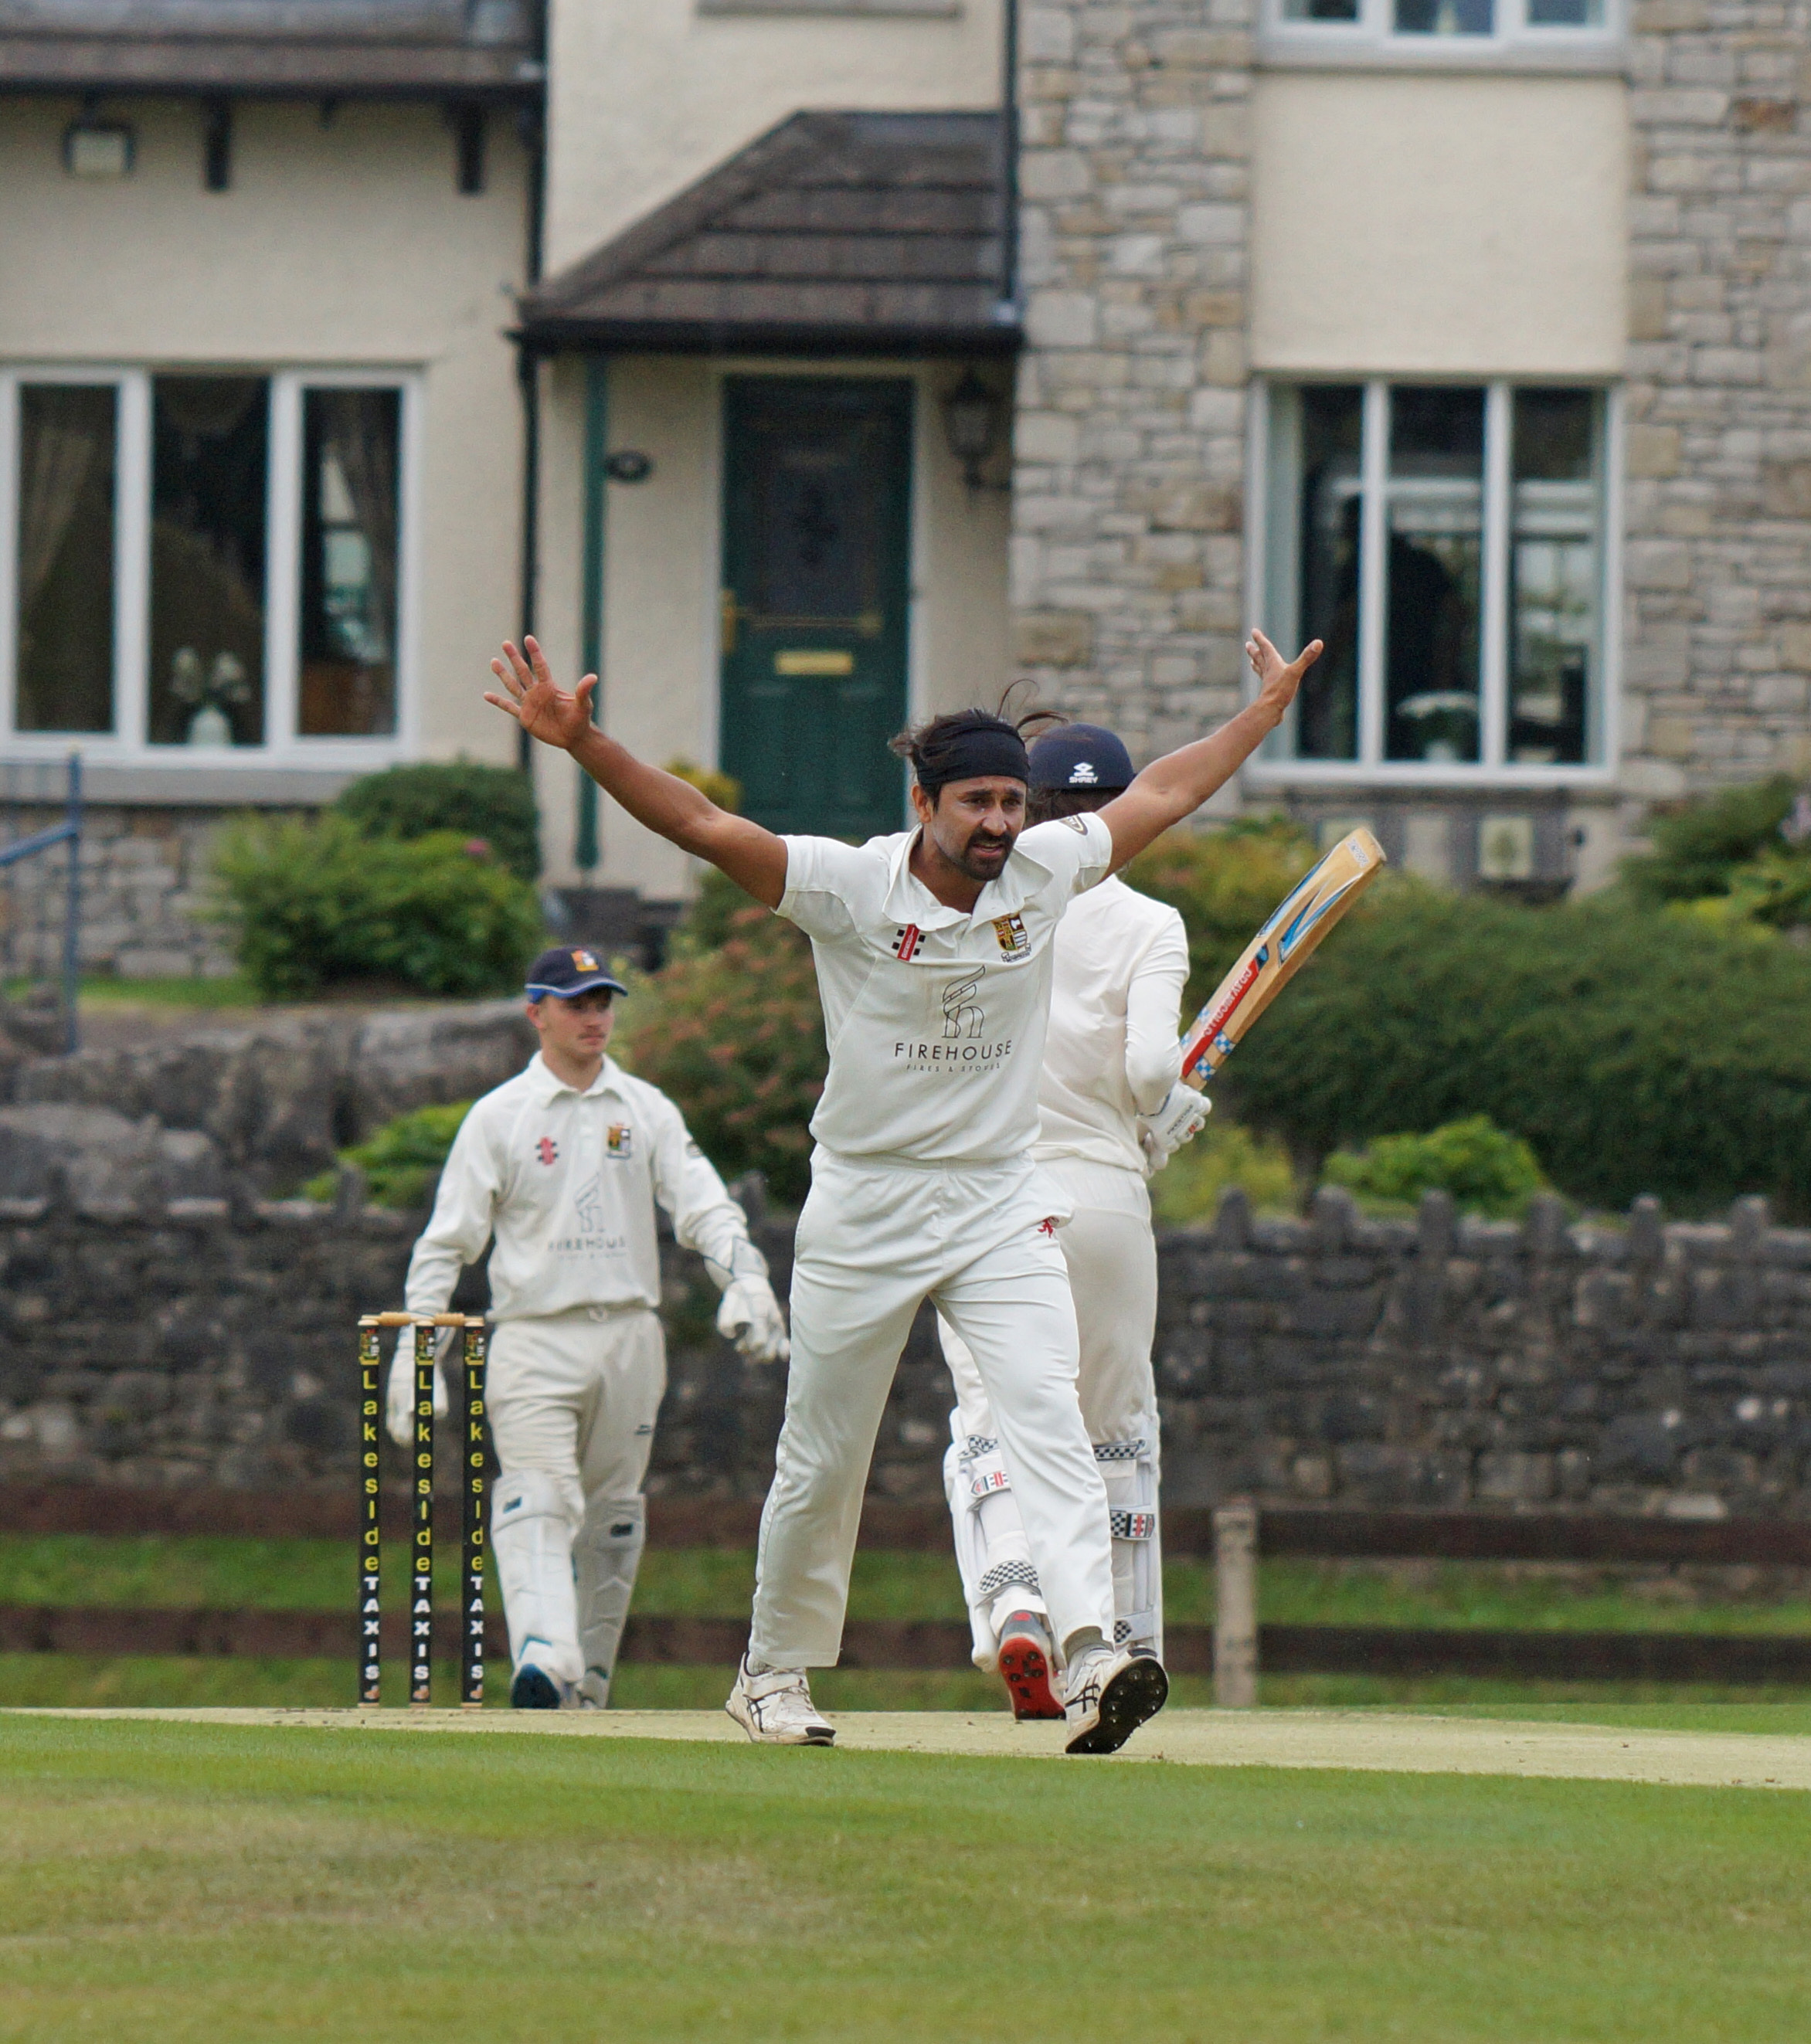 NETHERFIELD: Shrikant Mundhe appeals (Report and pictures from Richard Edmondson)